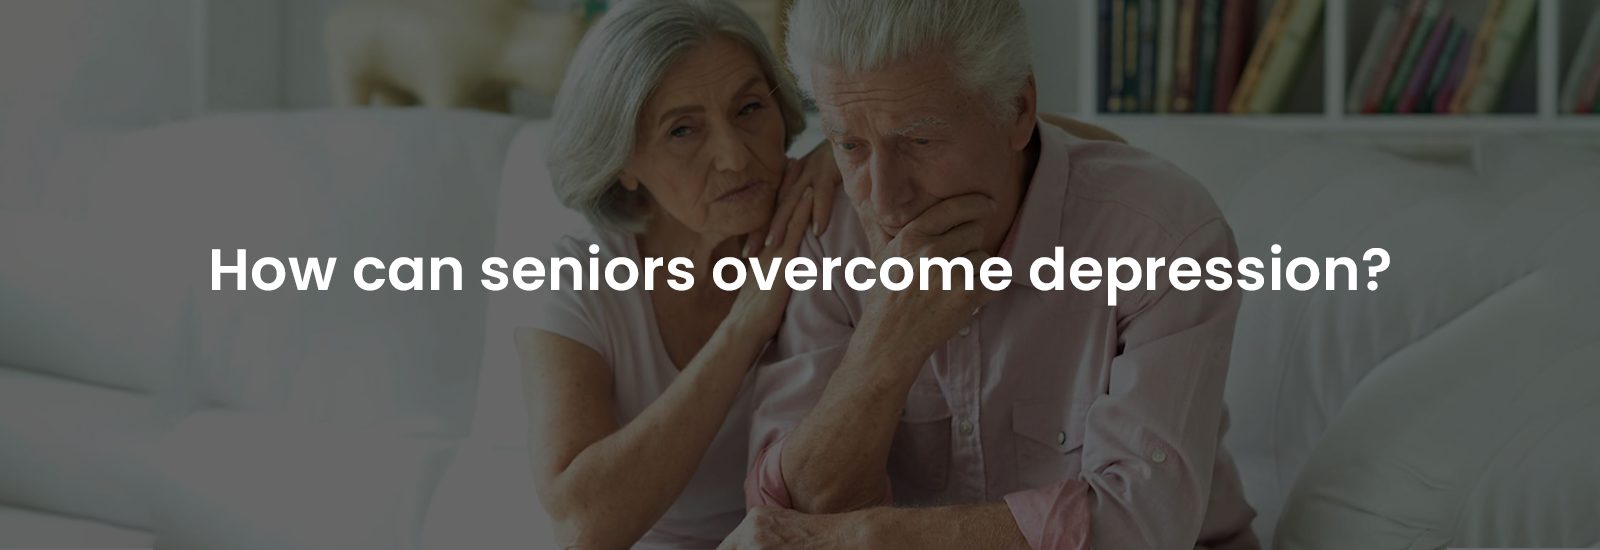 How Can Seniors Overcome Depression? | Banner Image